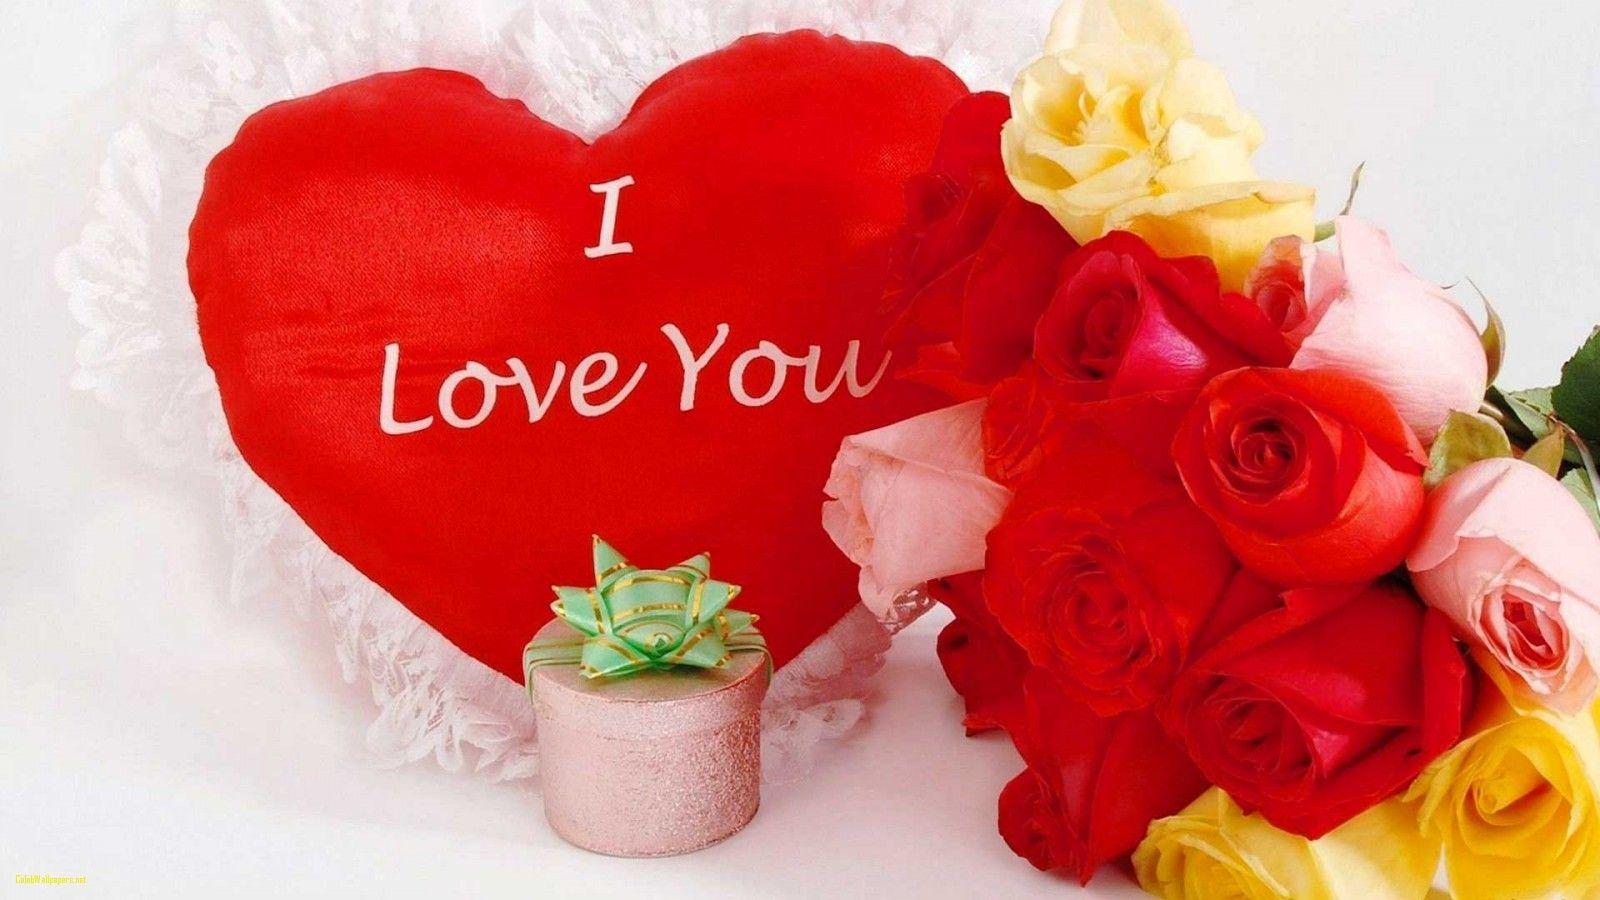 I Love You S Pics Wallpaper Download Best Of I Love You Image HD